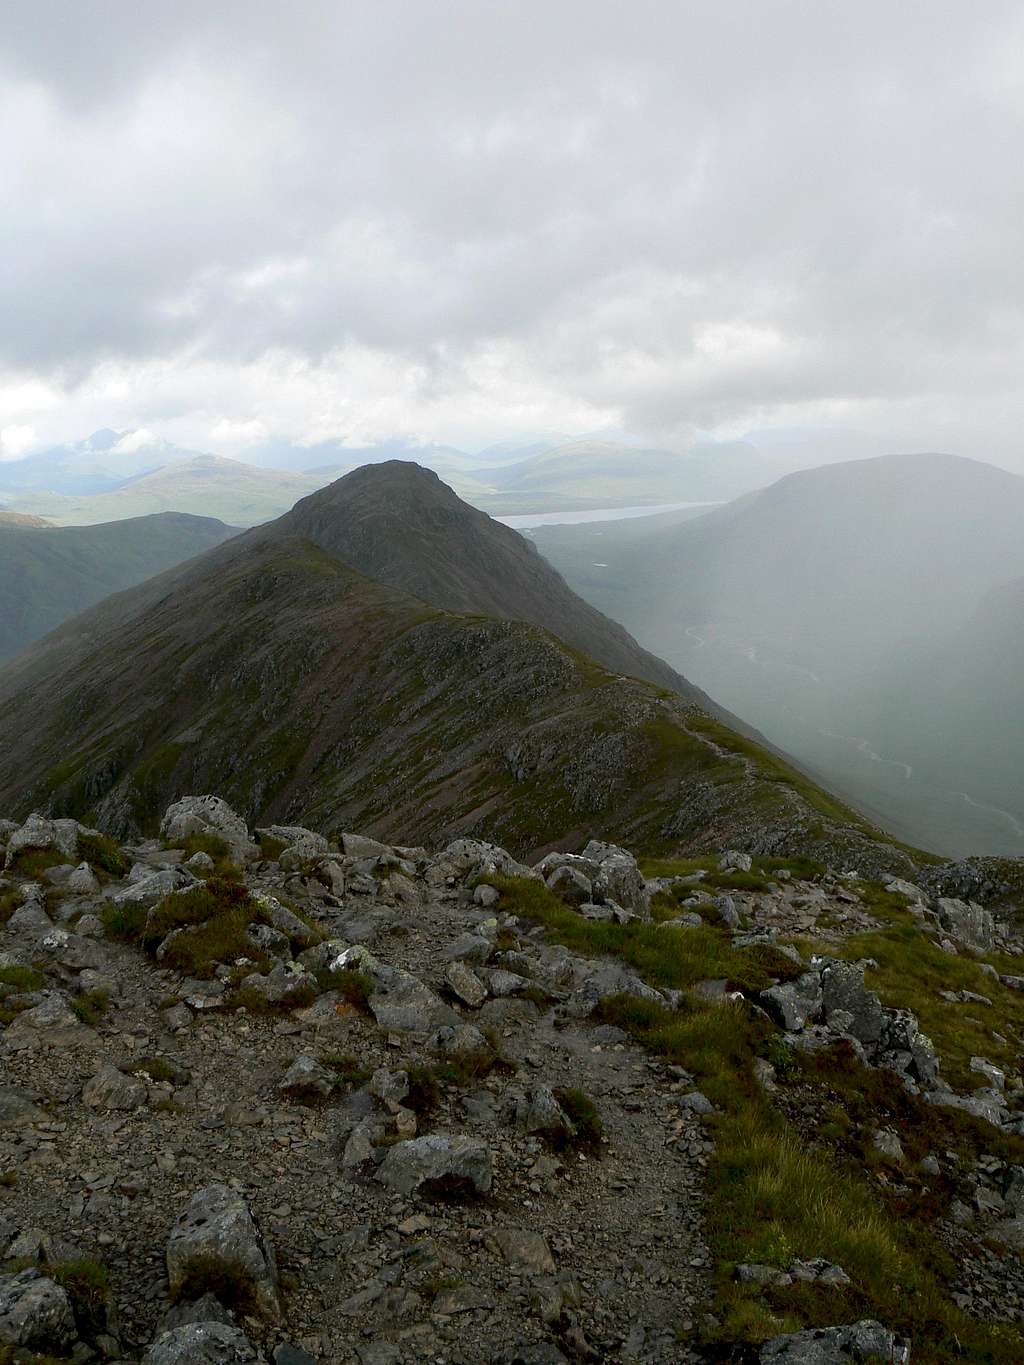 Looking along the ridge from Stob Dubh